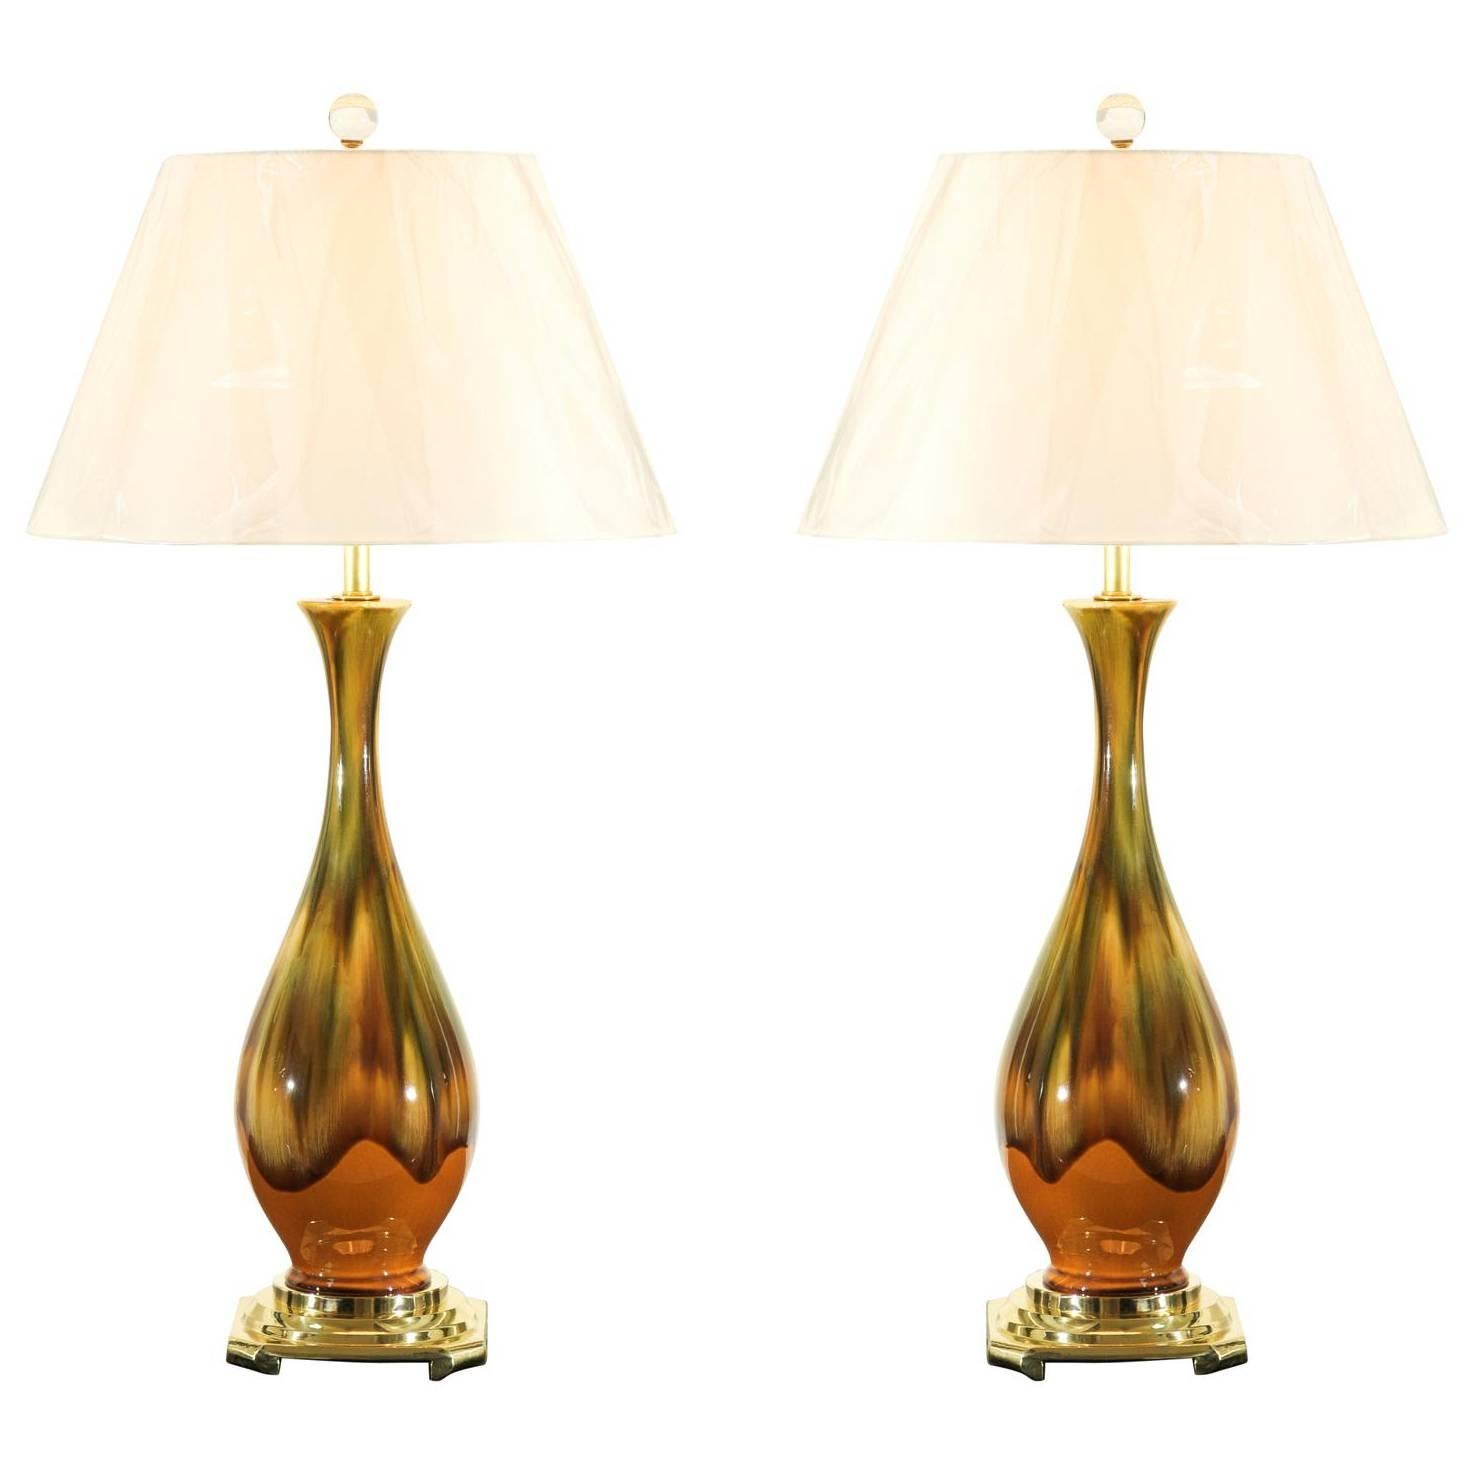 Restored Pair of Vintage Dip Ceramic Lamps in Yellow Ochre, Caramel and Green